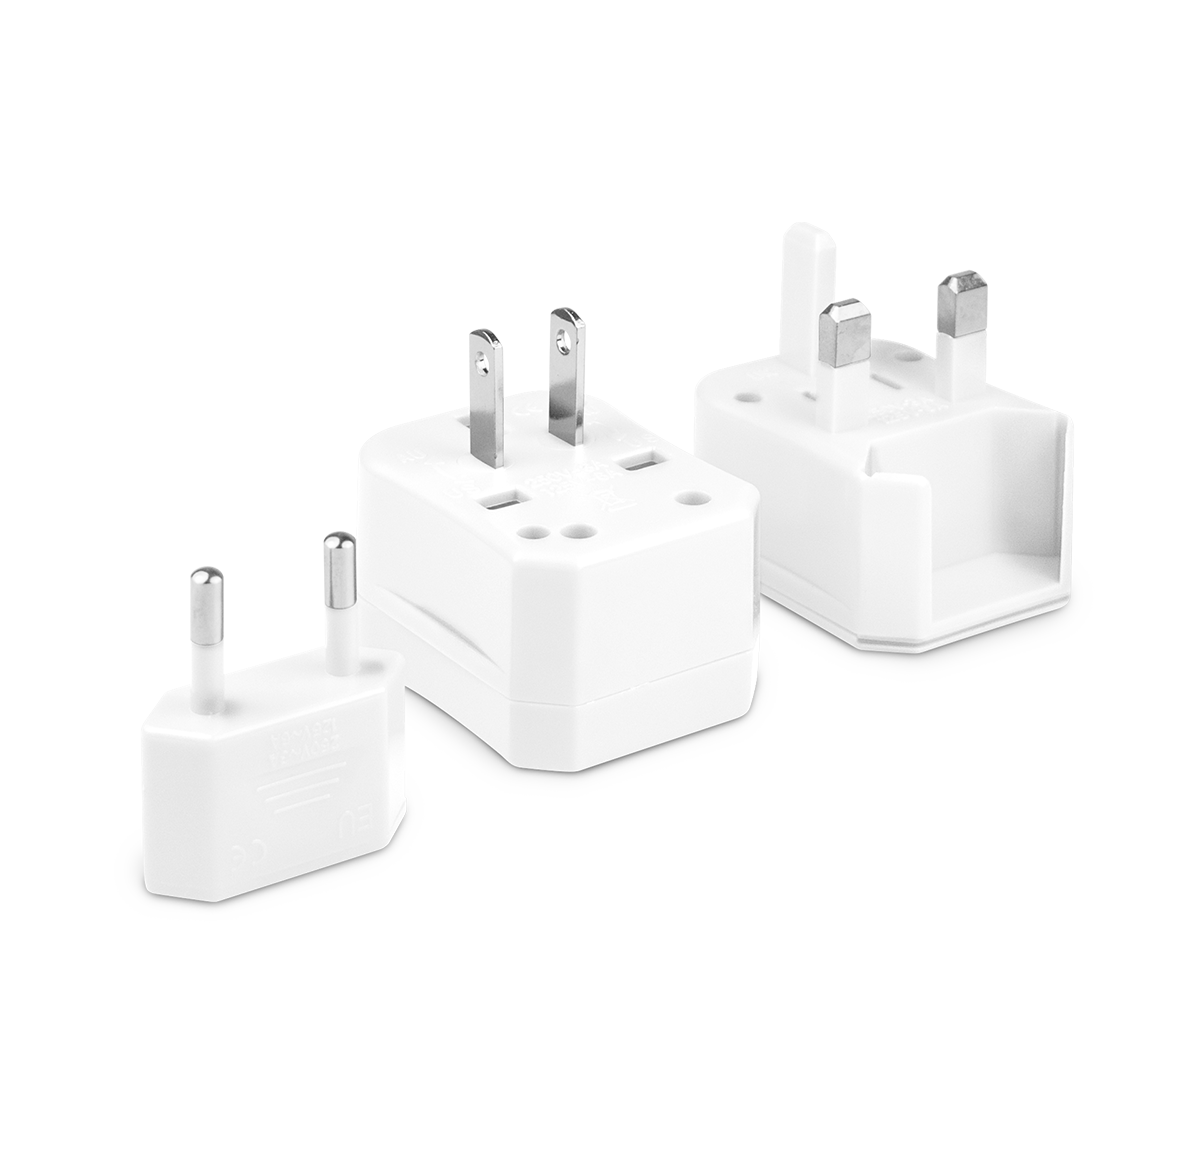 Three pieces of the universal travel adapter. This travel plug adapter is White. The World Traveler Travel Adapter is the perfect compact travel adapter to charge your tech on-the-go.